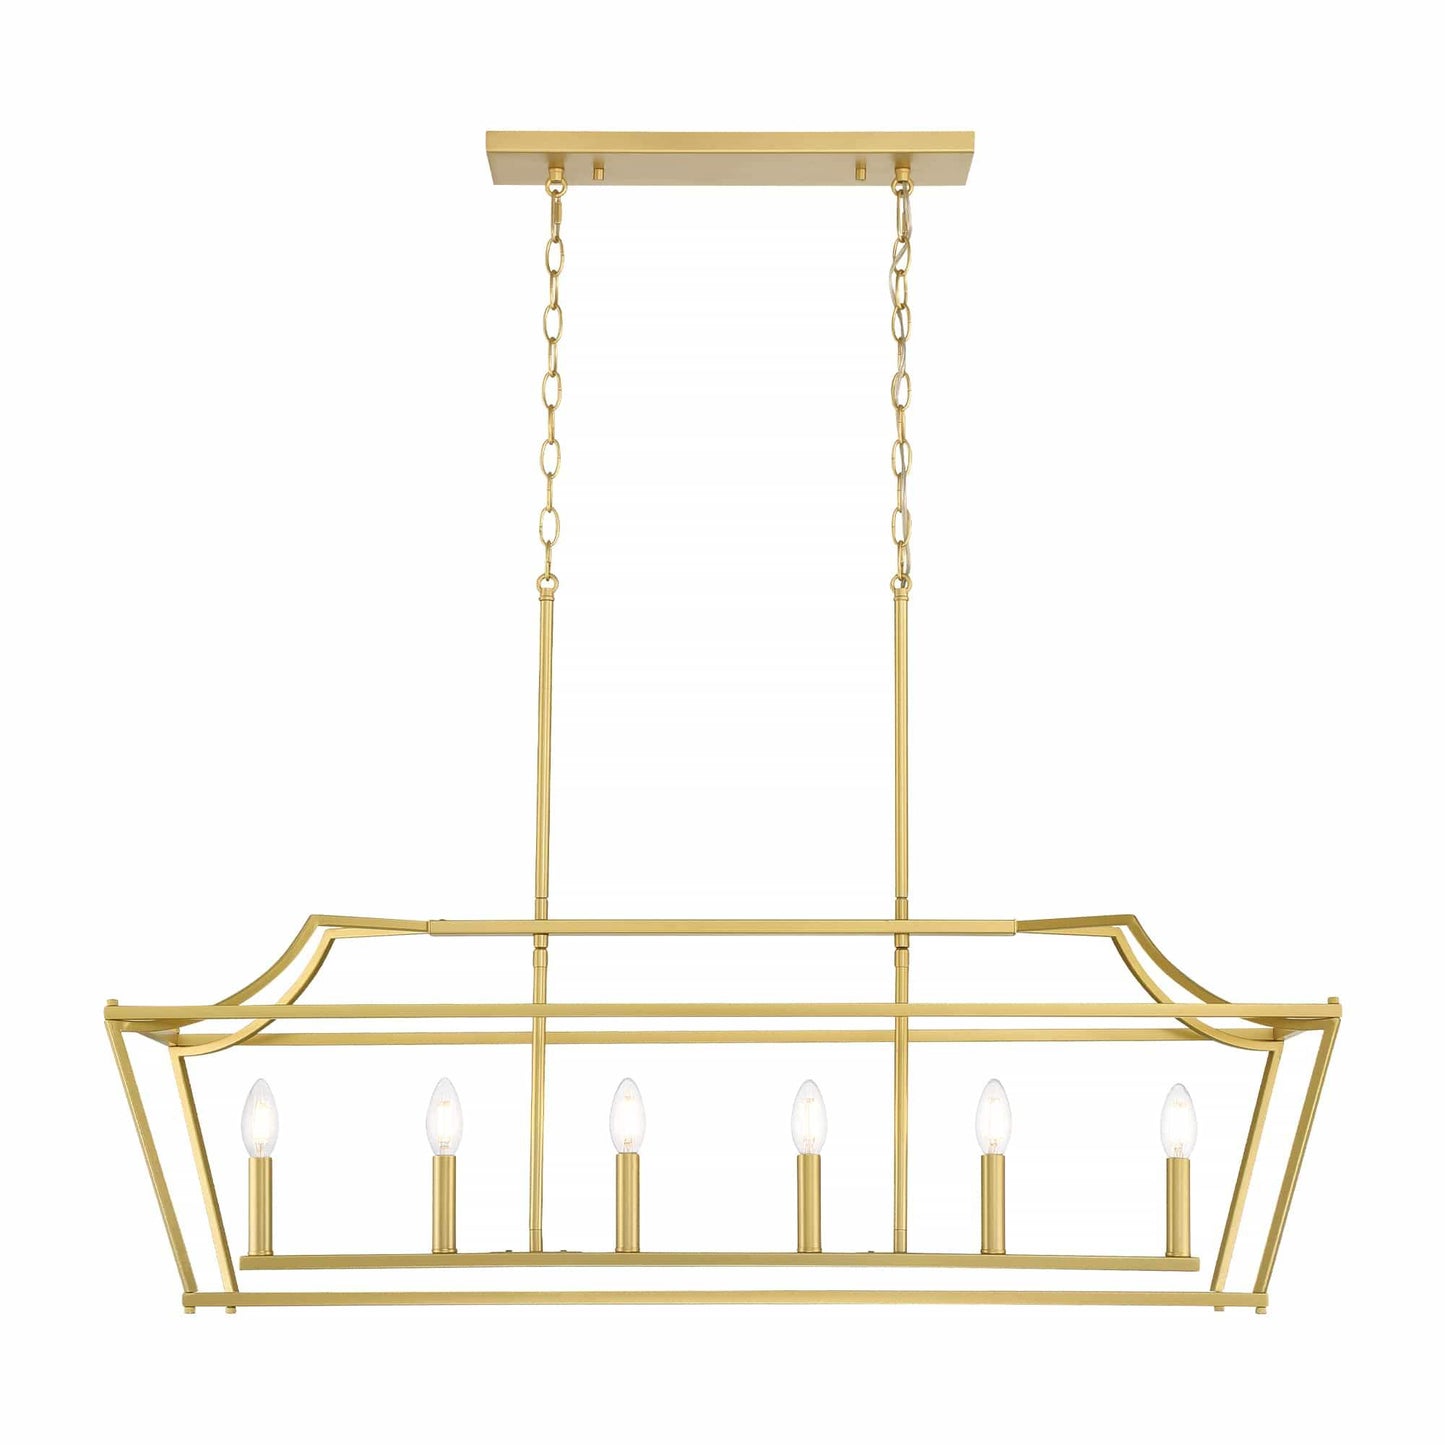 6 light linear rectangle chandelier (4) by ACROMA